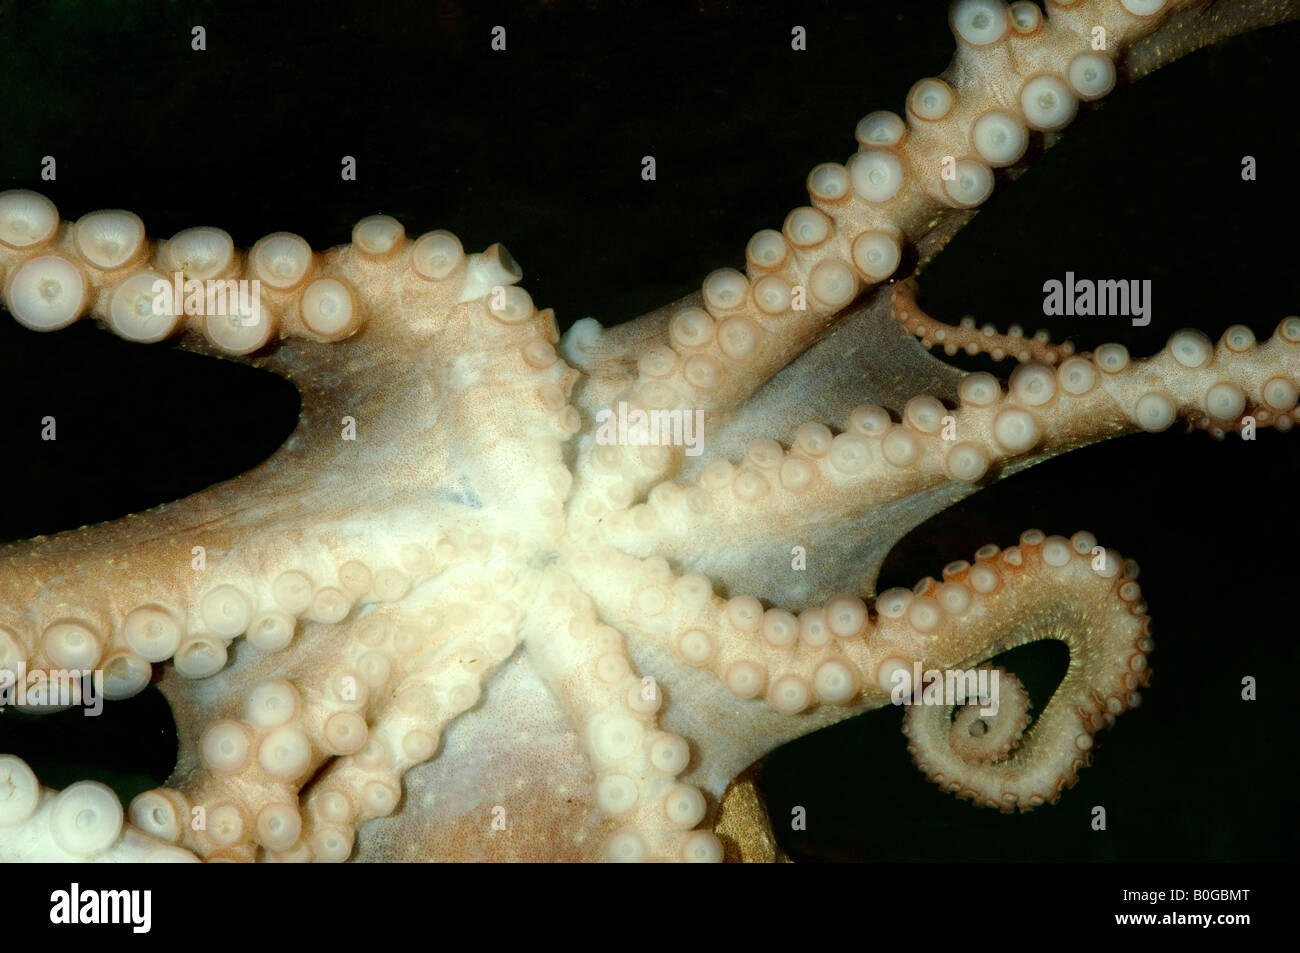 Live octopus zhang yu with writhing suckered arms, Dalian, Liaoning Province, China known locally as chen zi Stock Photo